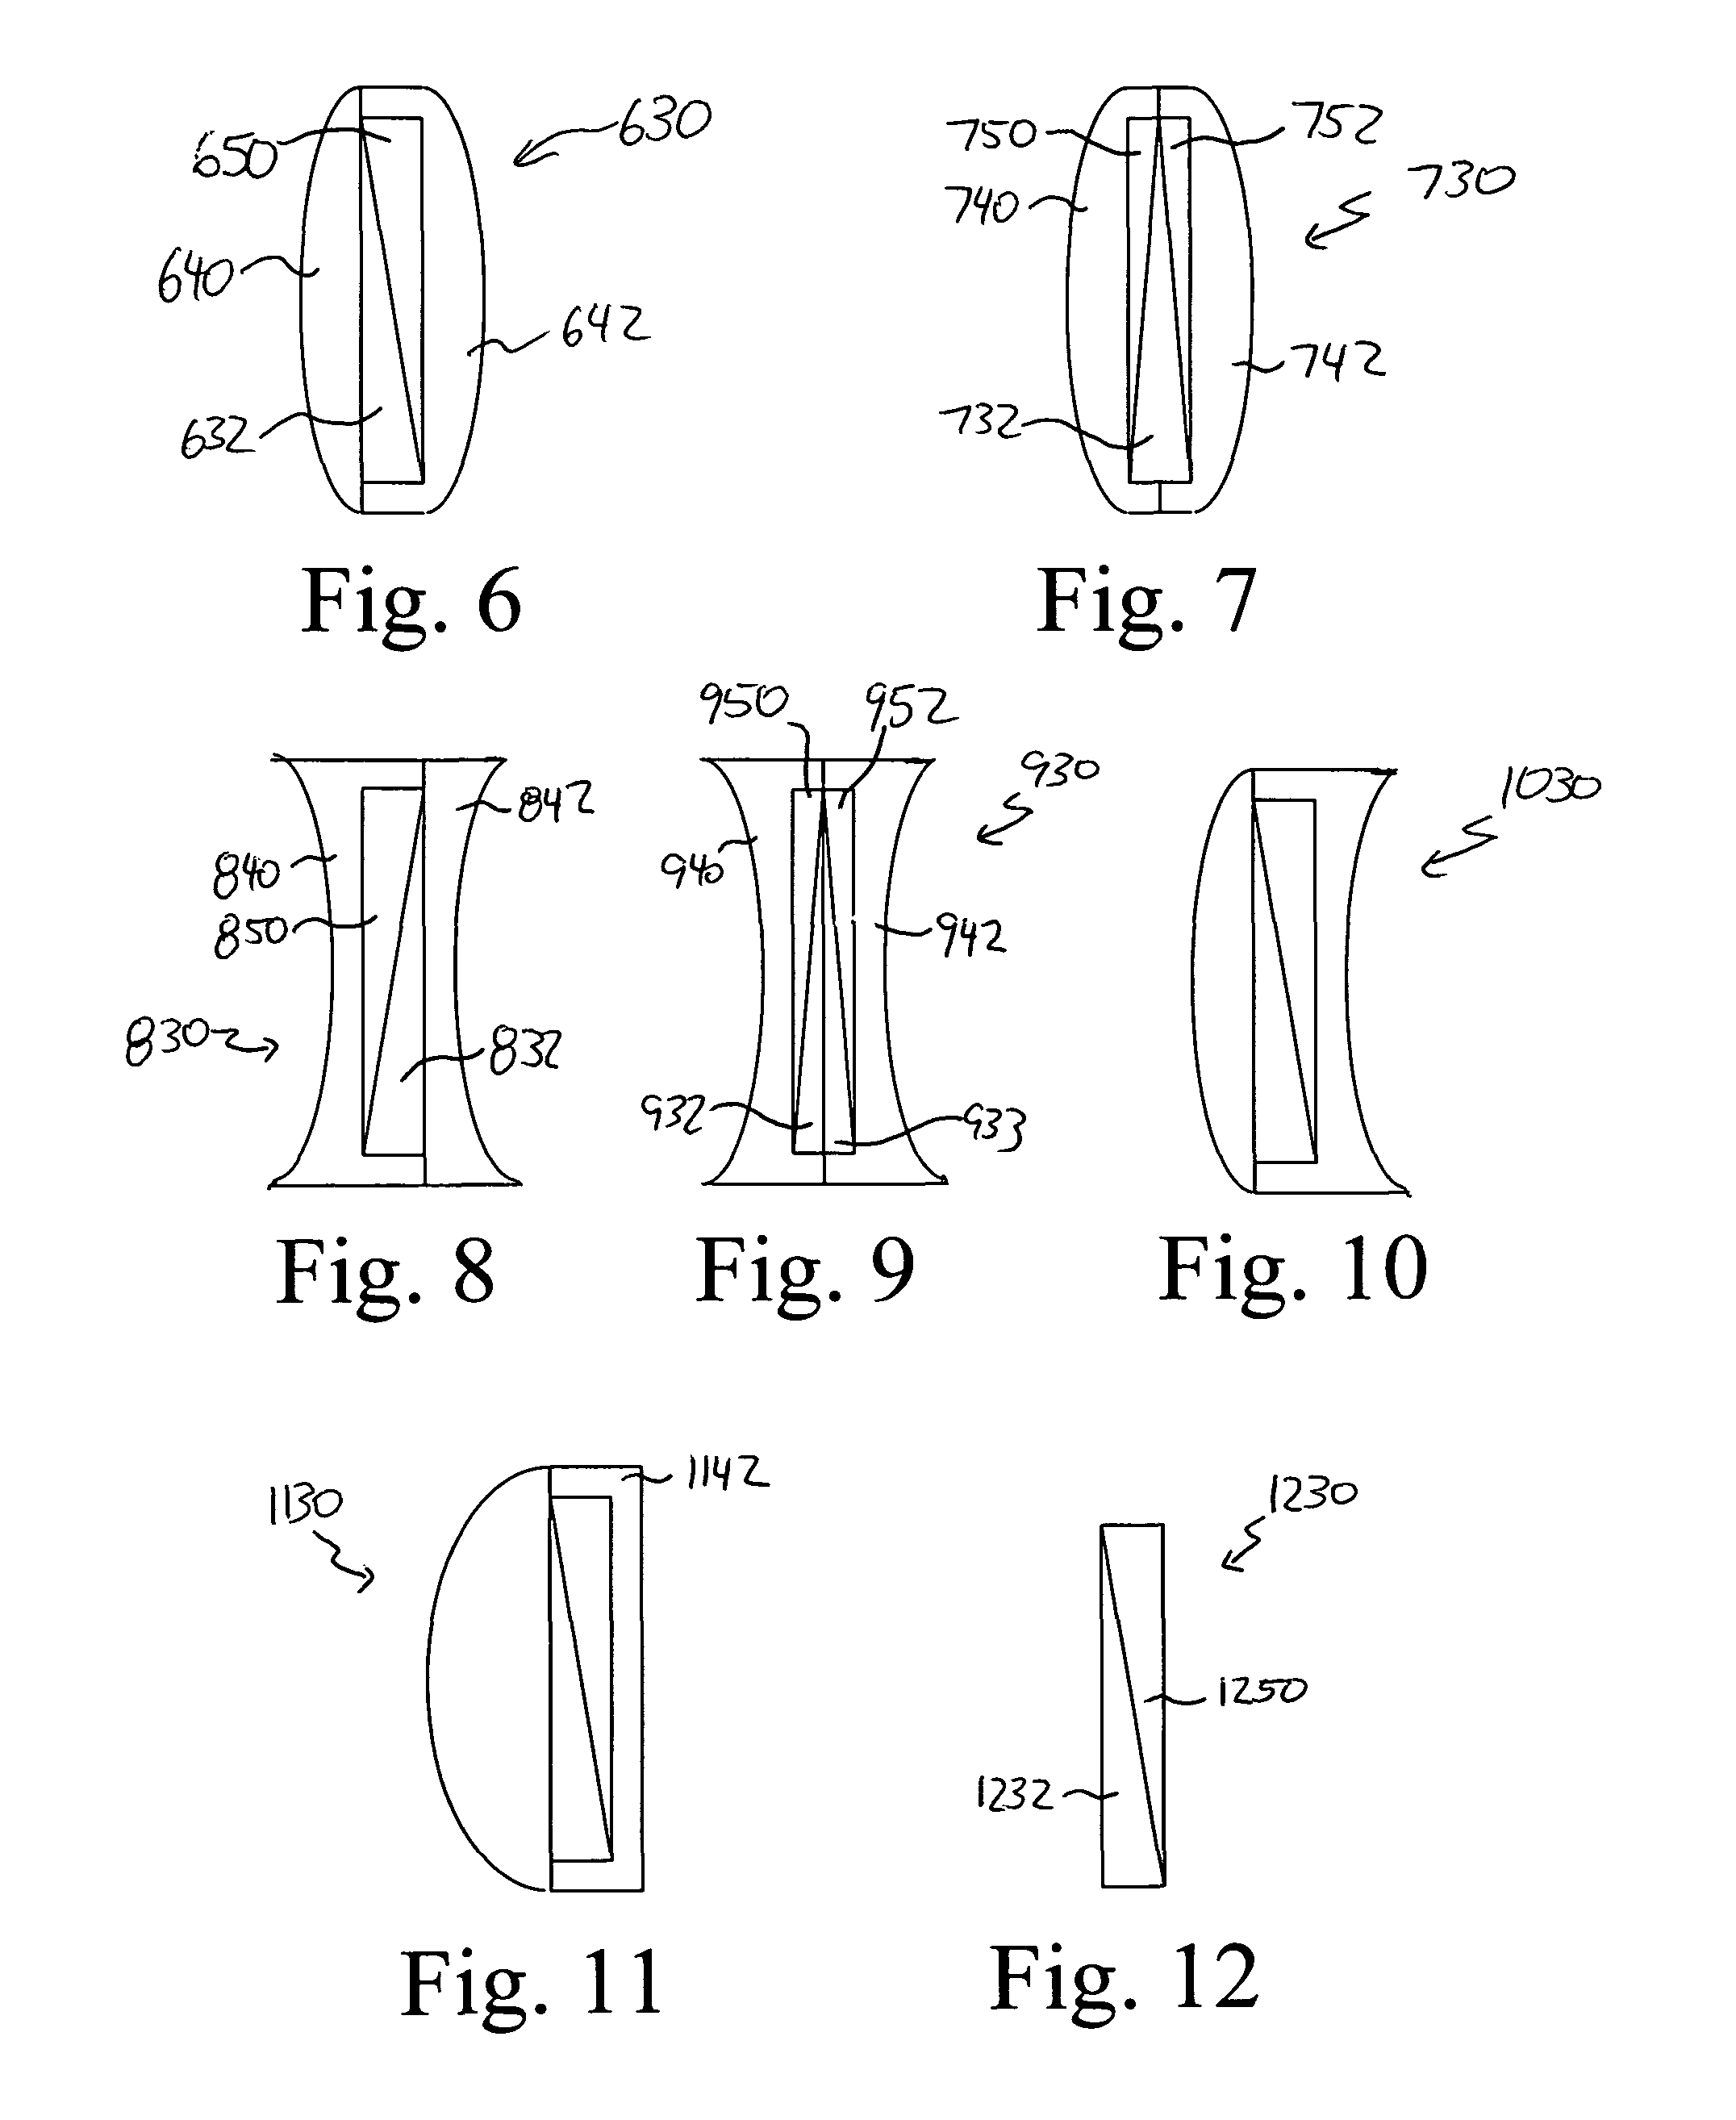 Implantable prismatic device, and related methods and systems